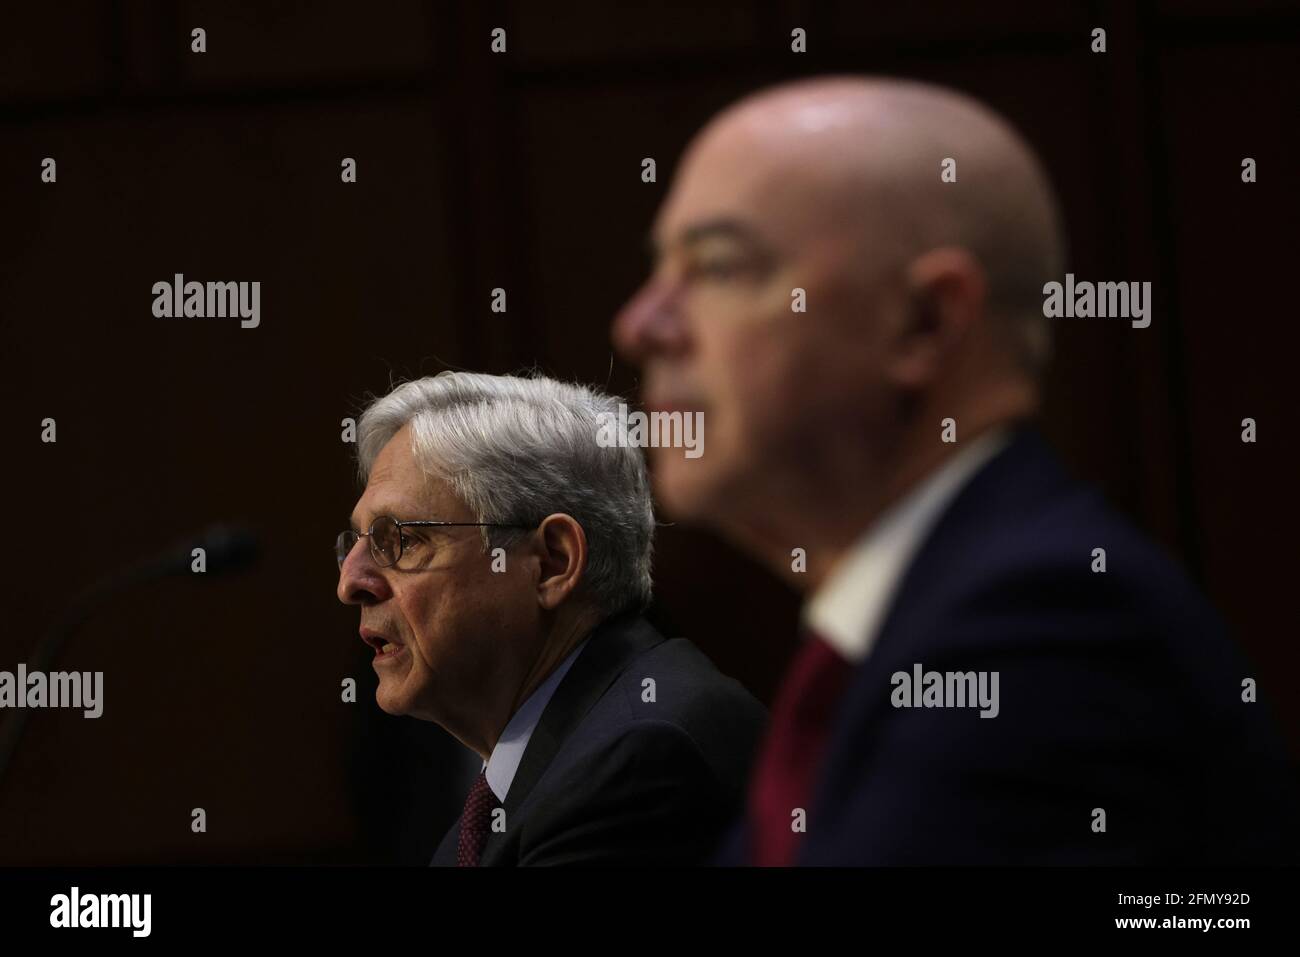 Washington, United States. 12th May, 2021. U.S. Attorney General Merrick Garland (L) and Homeland Security Secretary Alejandro Mayorkas (R) testify during a hearing before the Senate Appropriations Committee at Hart Senate Office Building on May 12, 2021 on Capitol Hill in Washington, DC. The committee held a hearing on âÂ€ÂœDomestic Violent Extremism in America.âÂ€Â Photo by Alex Wong/Pool/ABACAPRESS.COM Credit: Abaca Press/Alamy Live News Stock Photo